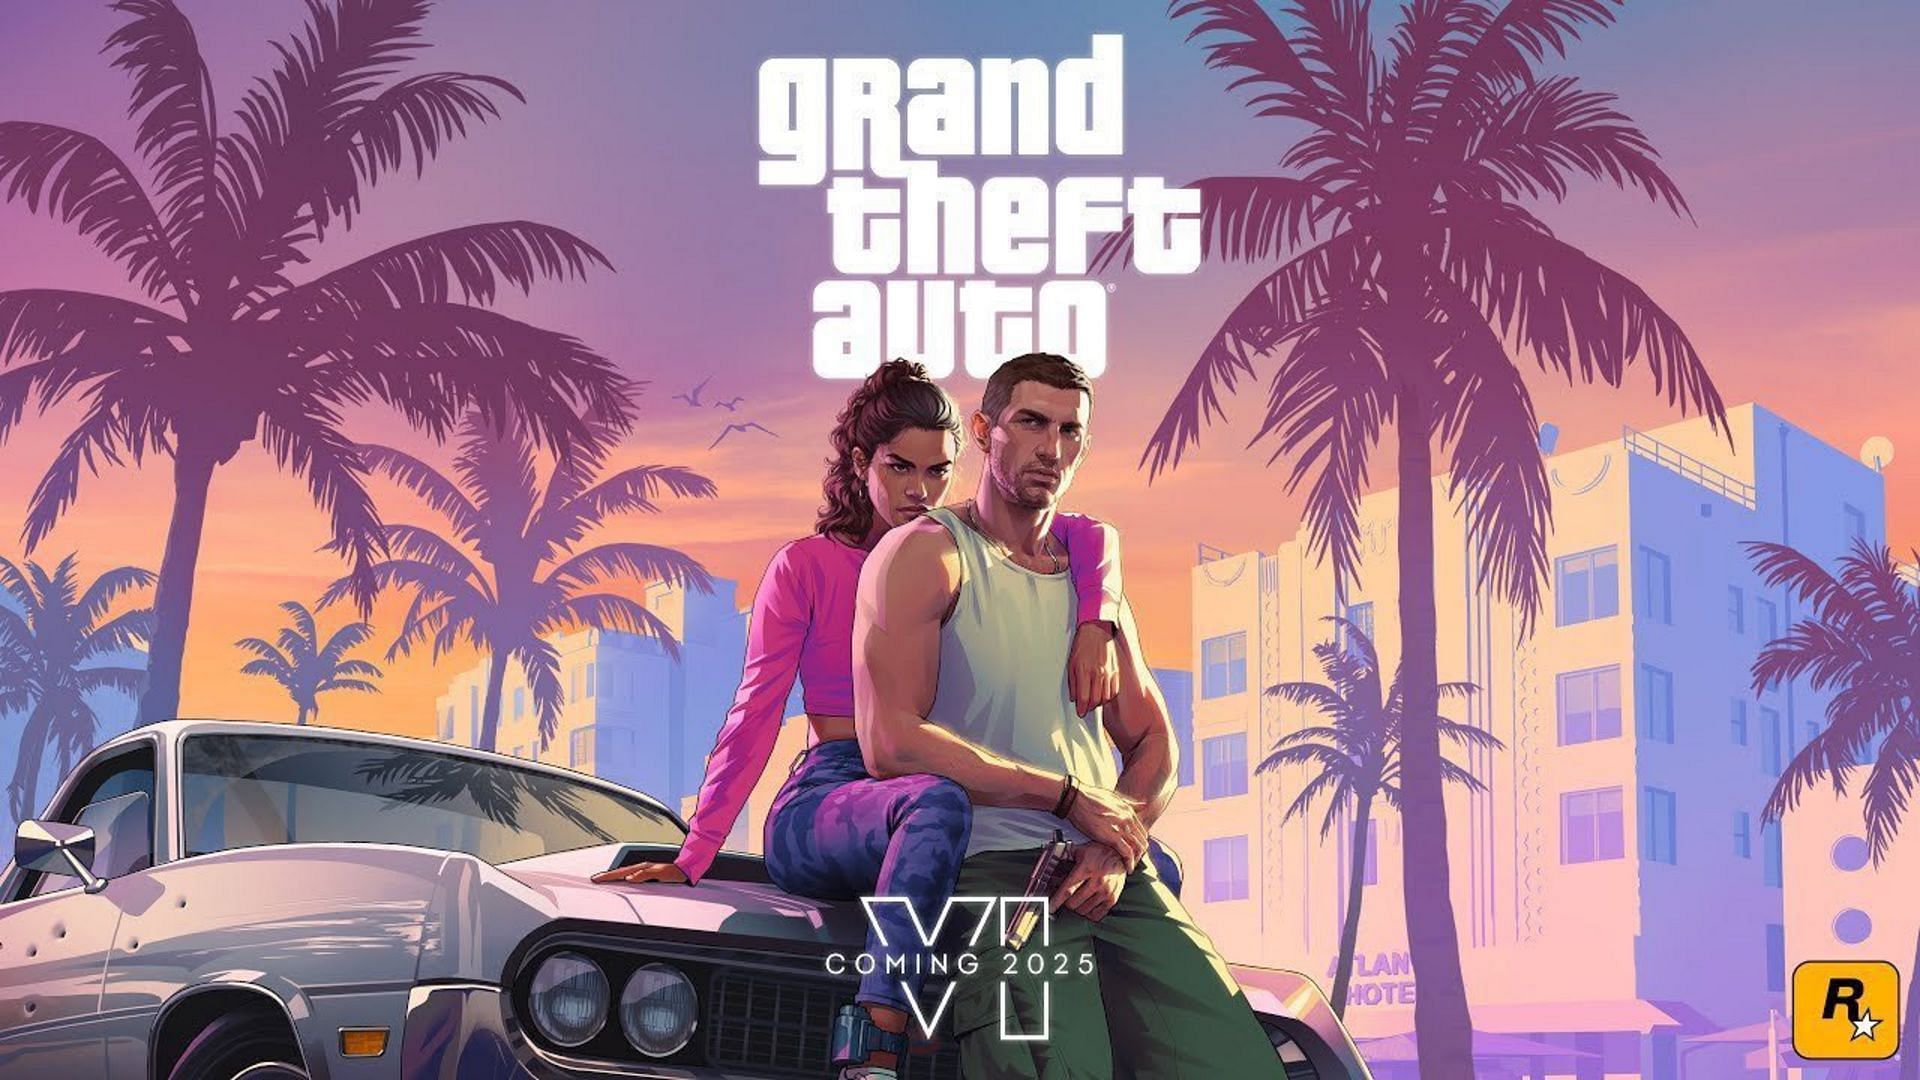 The official Grand Theft Auto 6 poster revealing the release window that Rockstar Games is aiming for (Image via YouTube/Rockstar Games)